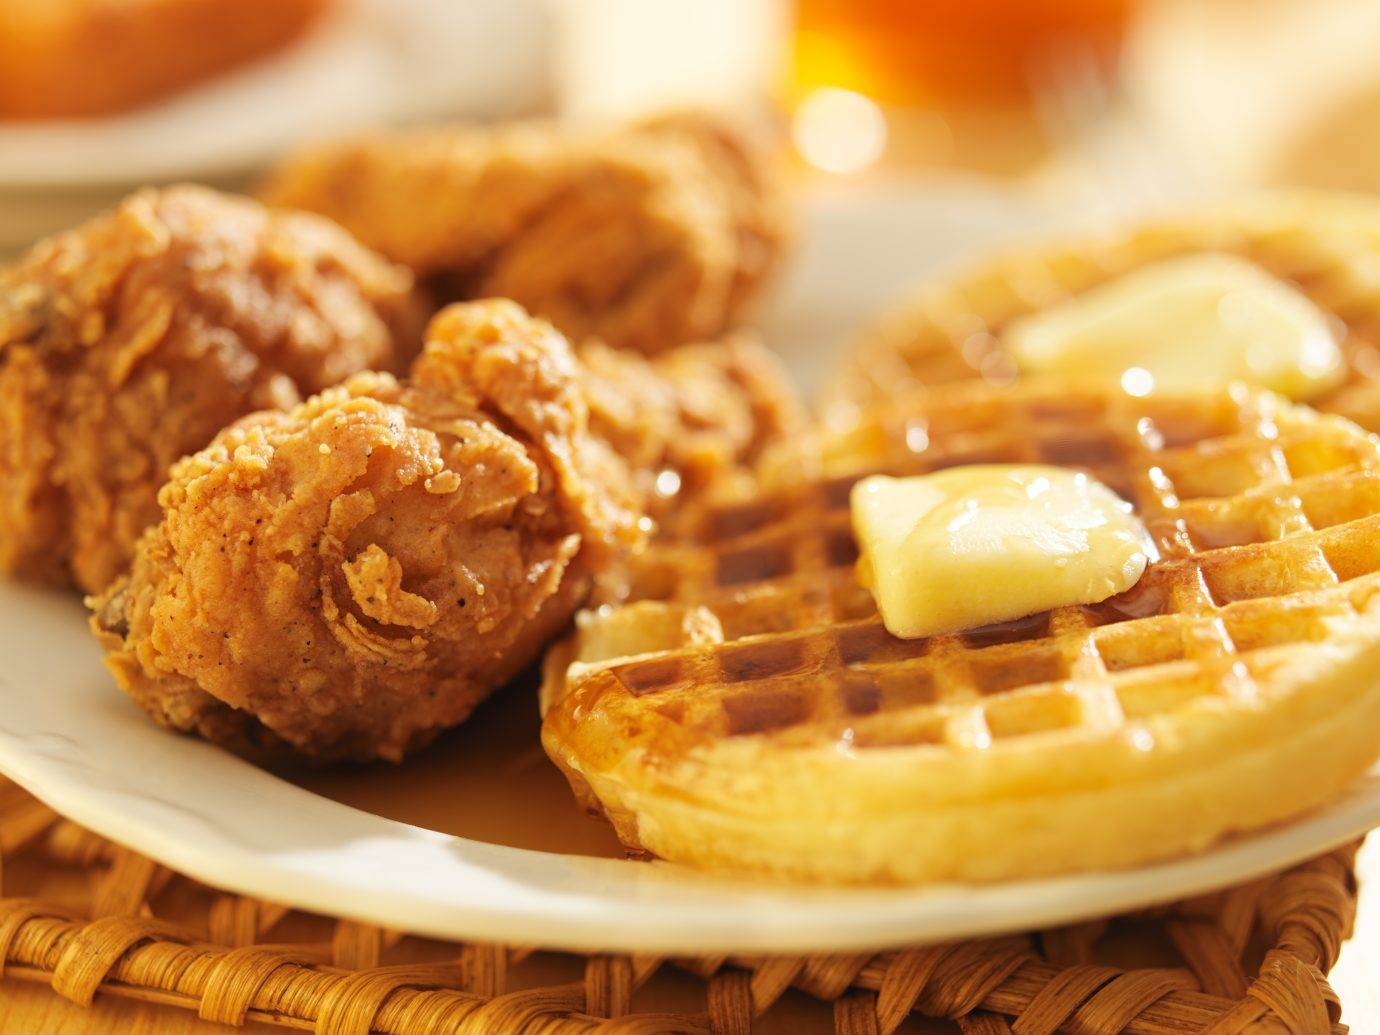 Chicken and waffles.